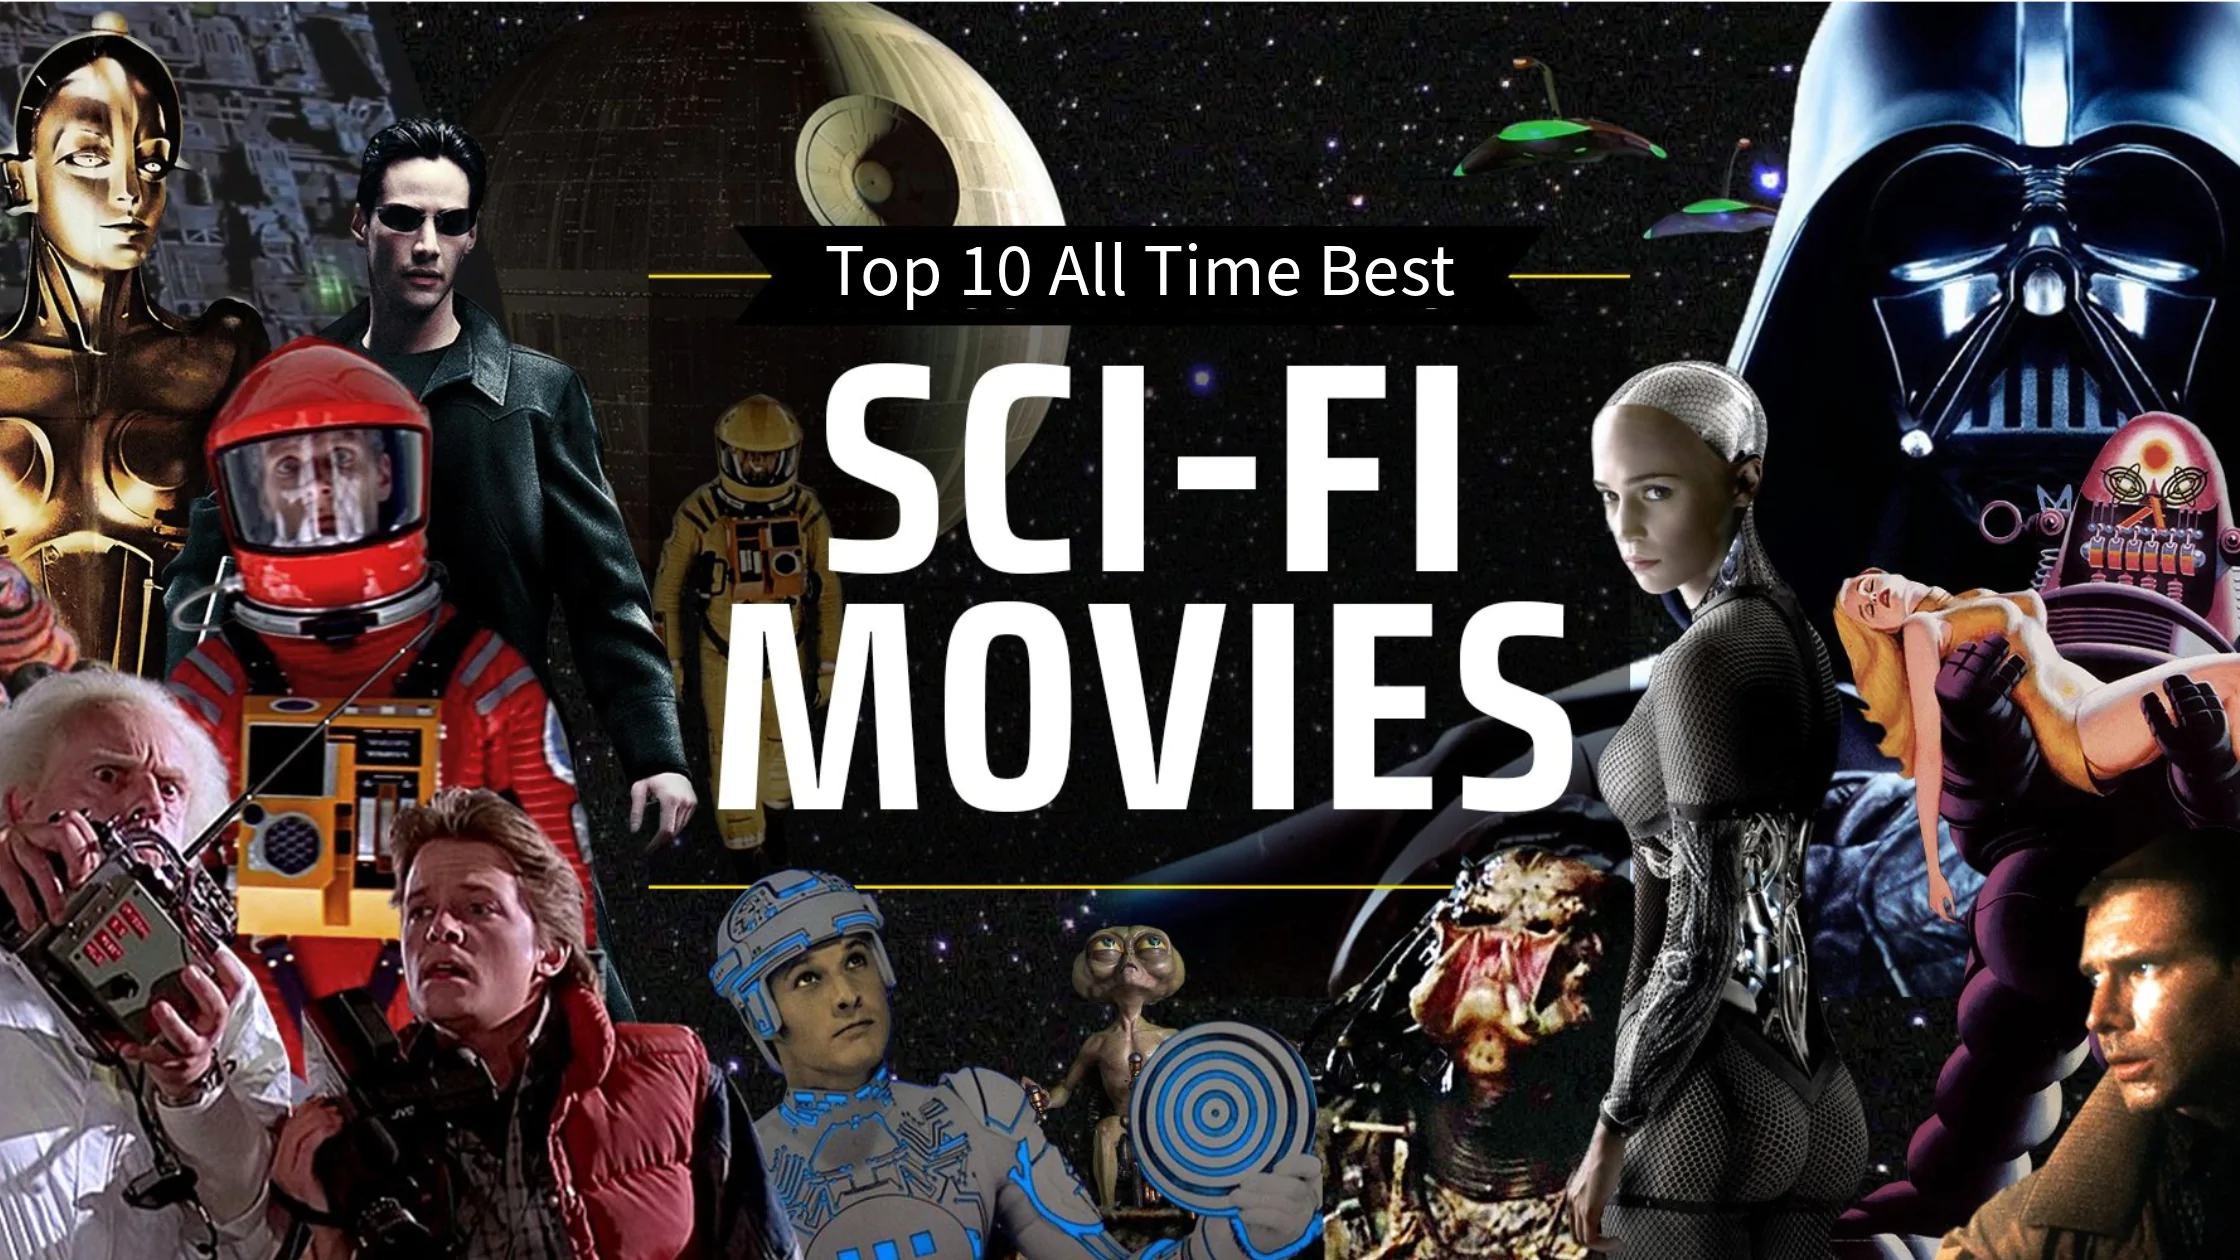 Top 10 Sci Fi Movies of All Time